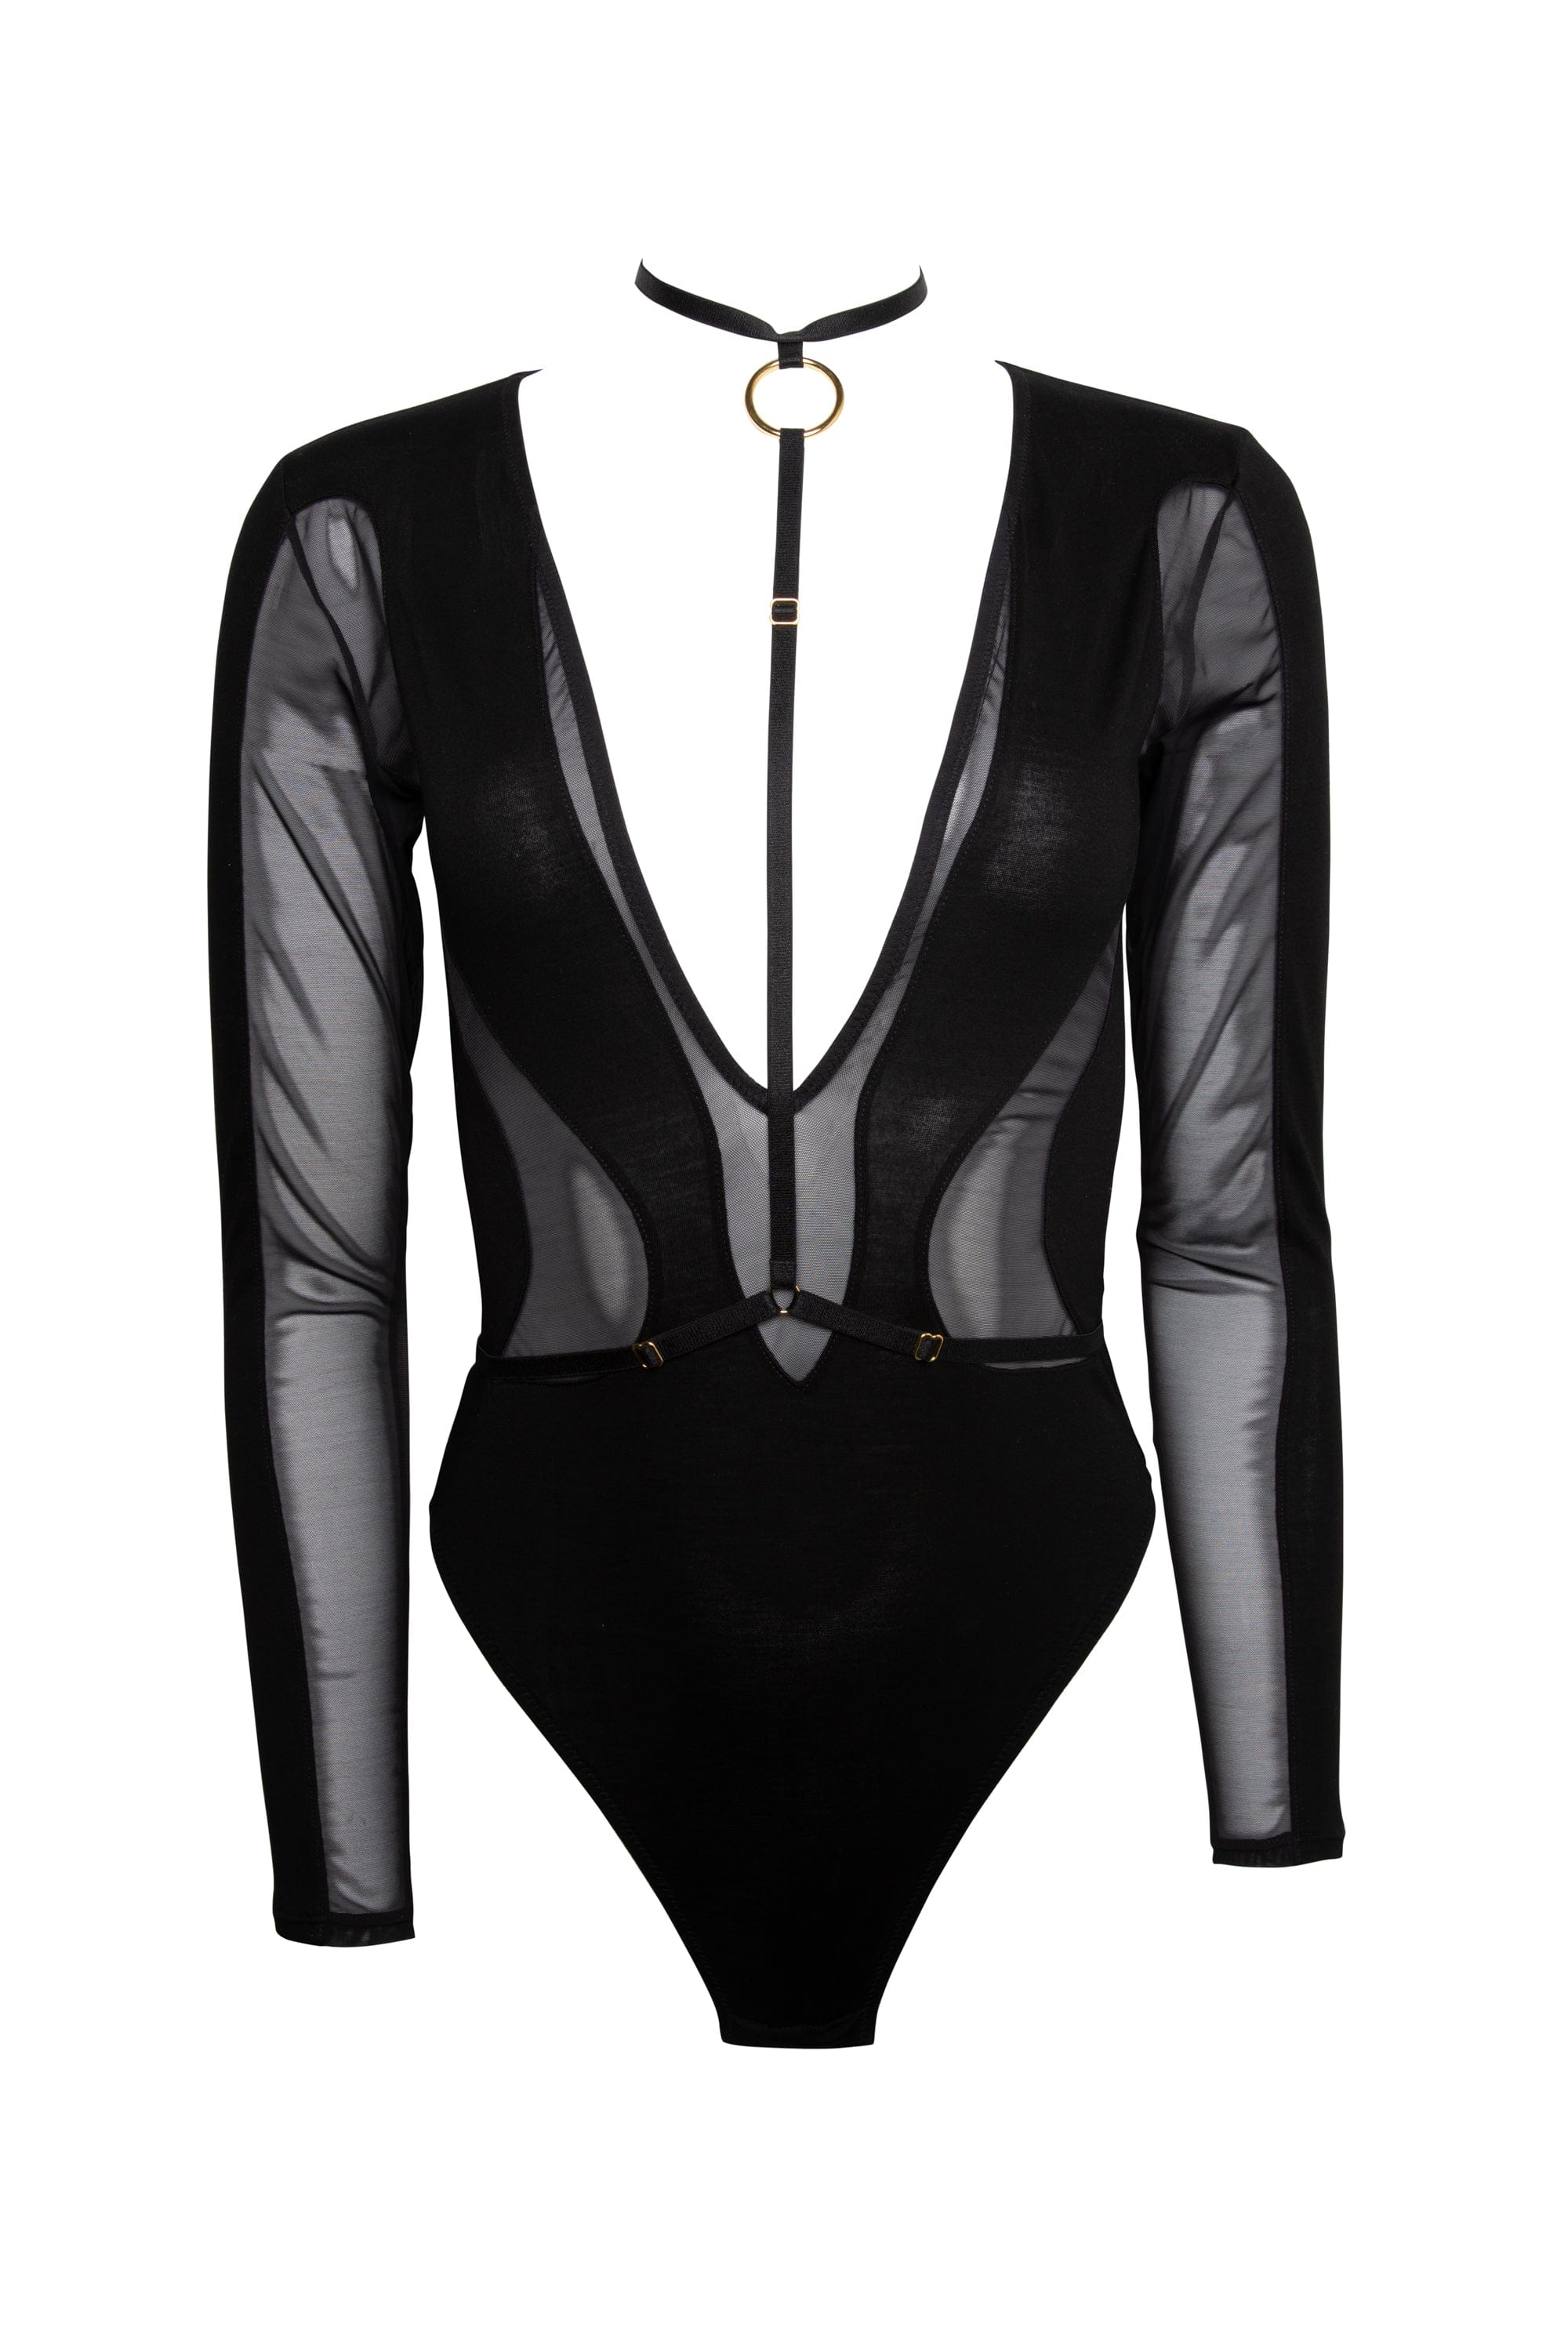 Absolutely in love with the new mesh @pumiey.us bodysuits! Perfect